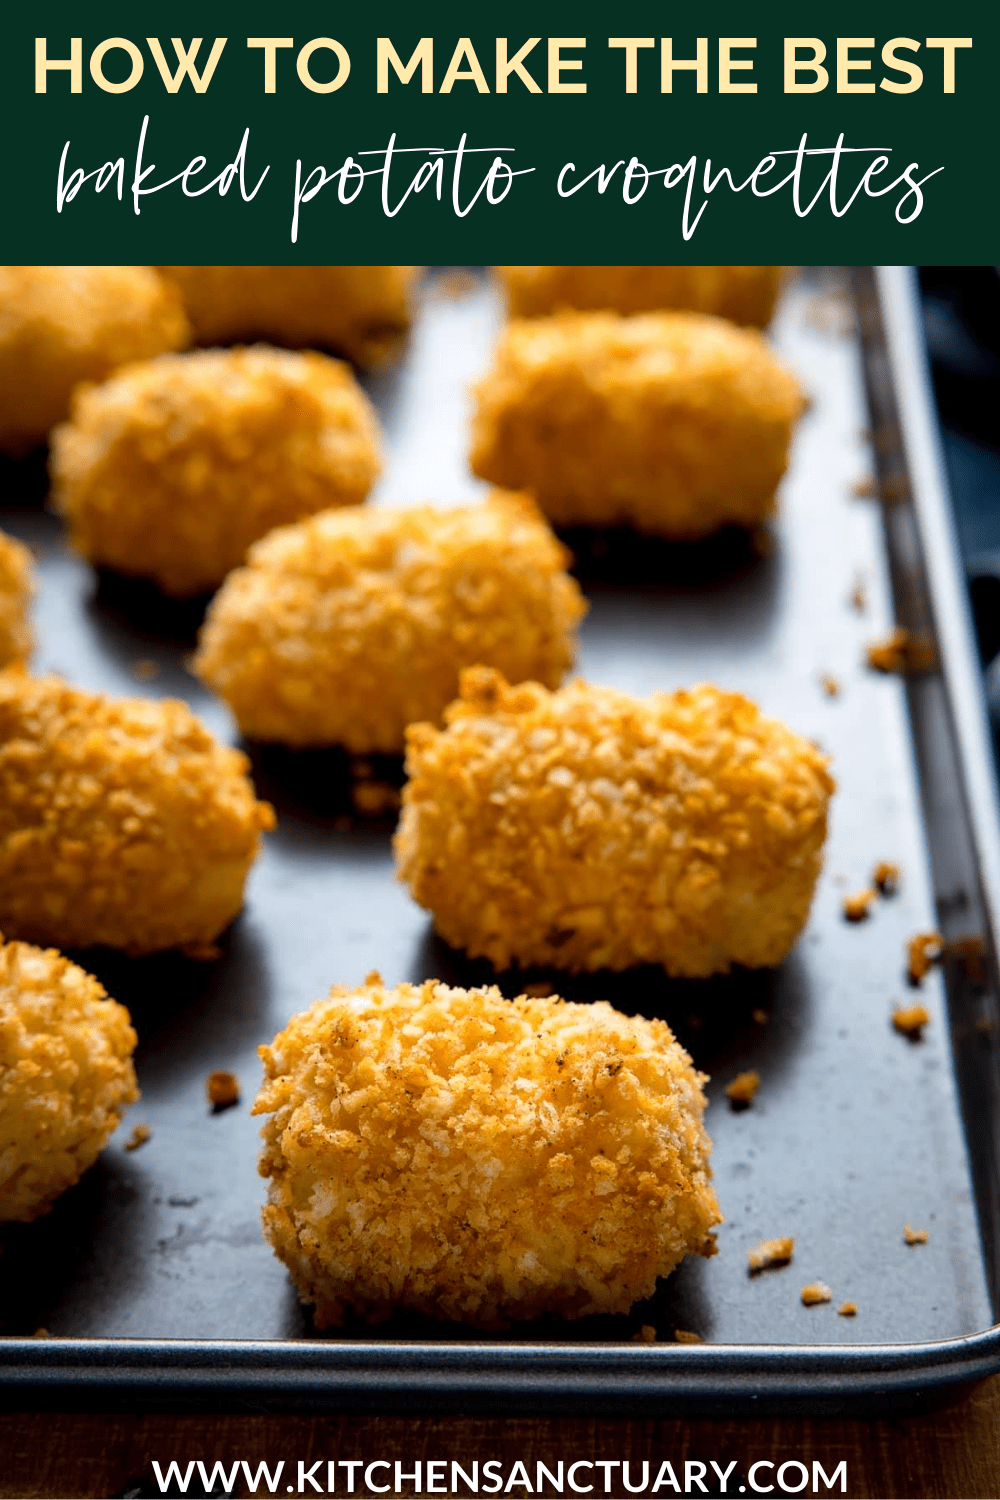 Baked Potato Croquettes with Cheese - Nicky's Kitchen Sanctuary